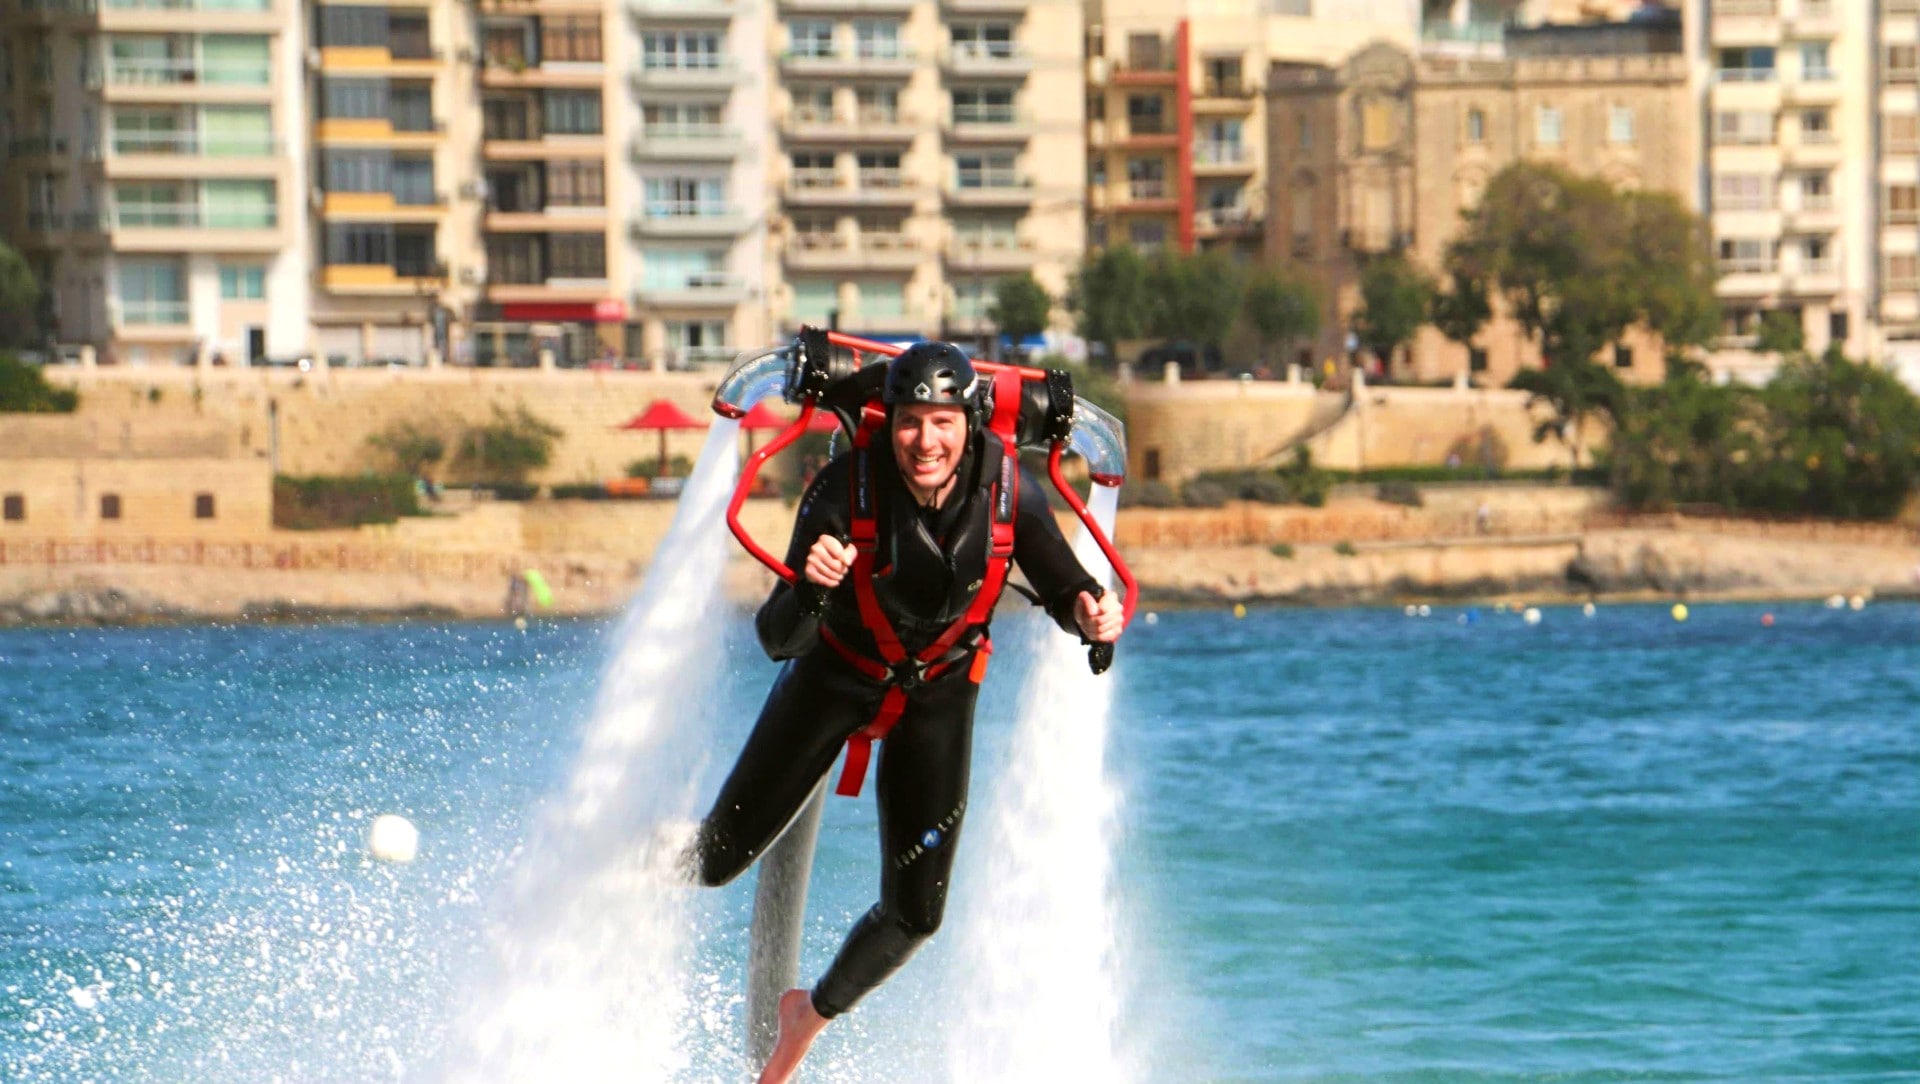 A guy's flying with a Jetpack in Malta.